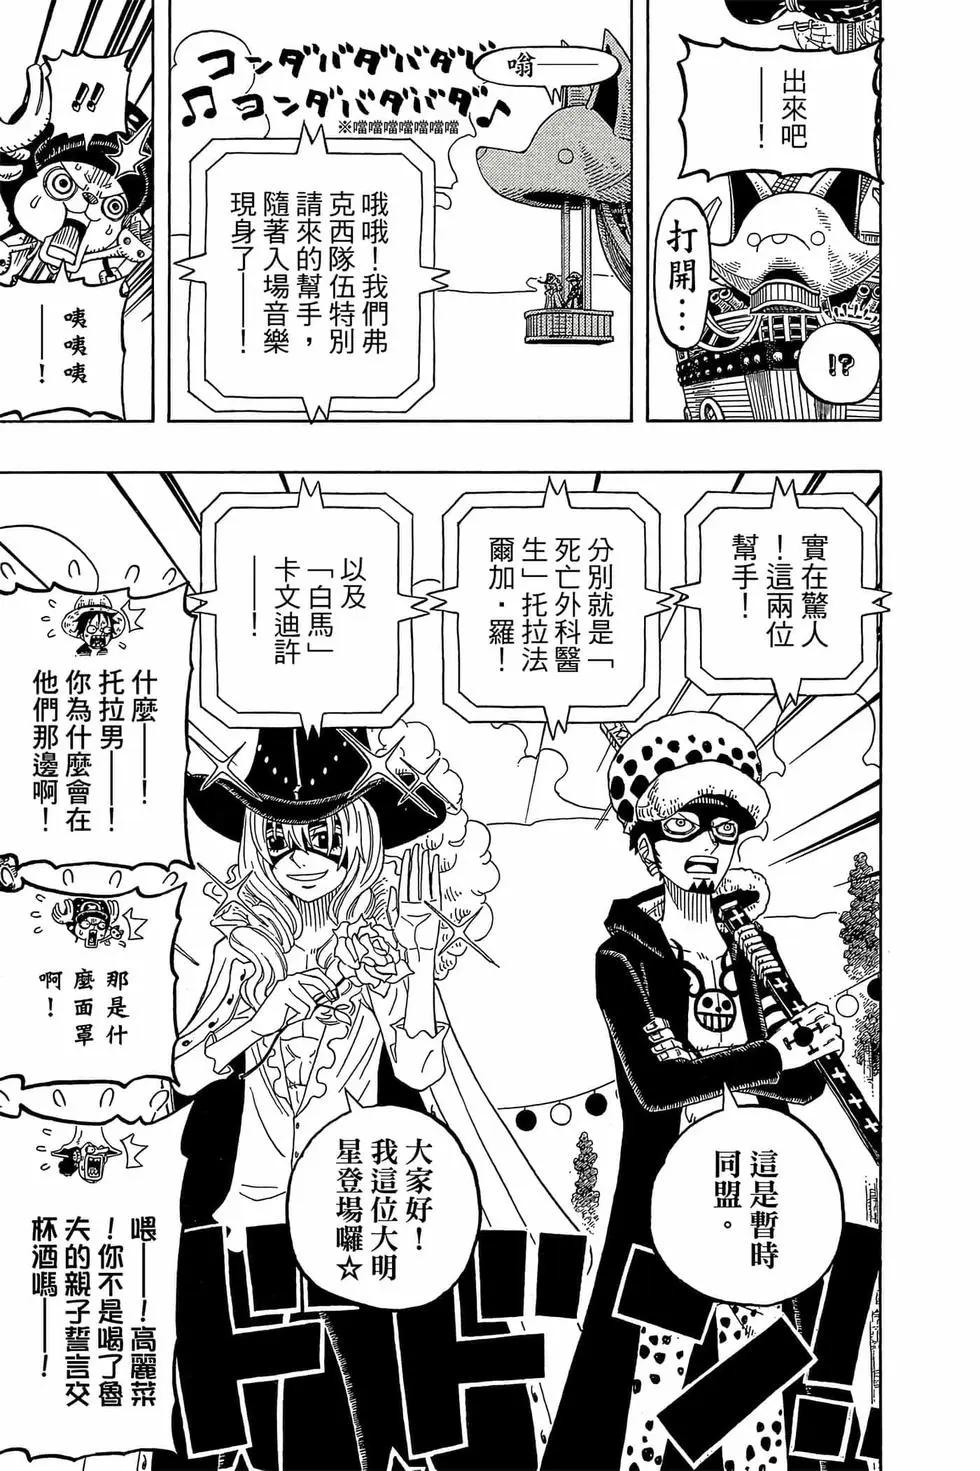 One piece party - 第02卷(1/4) - 4